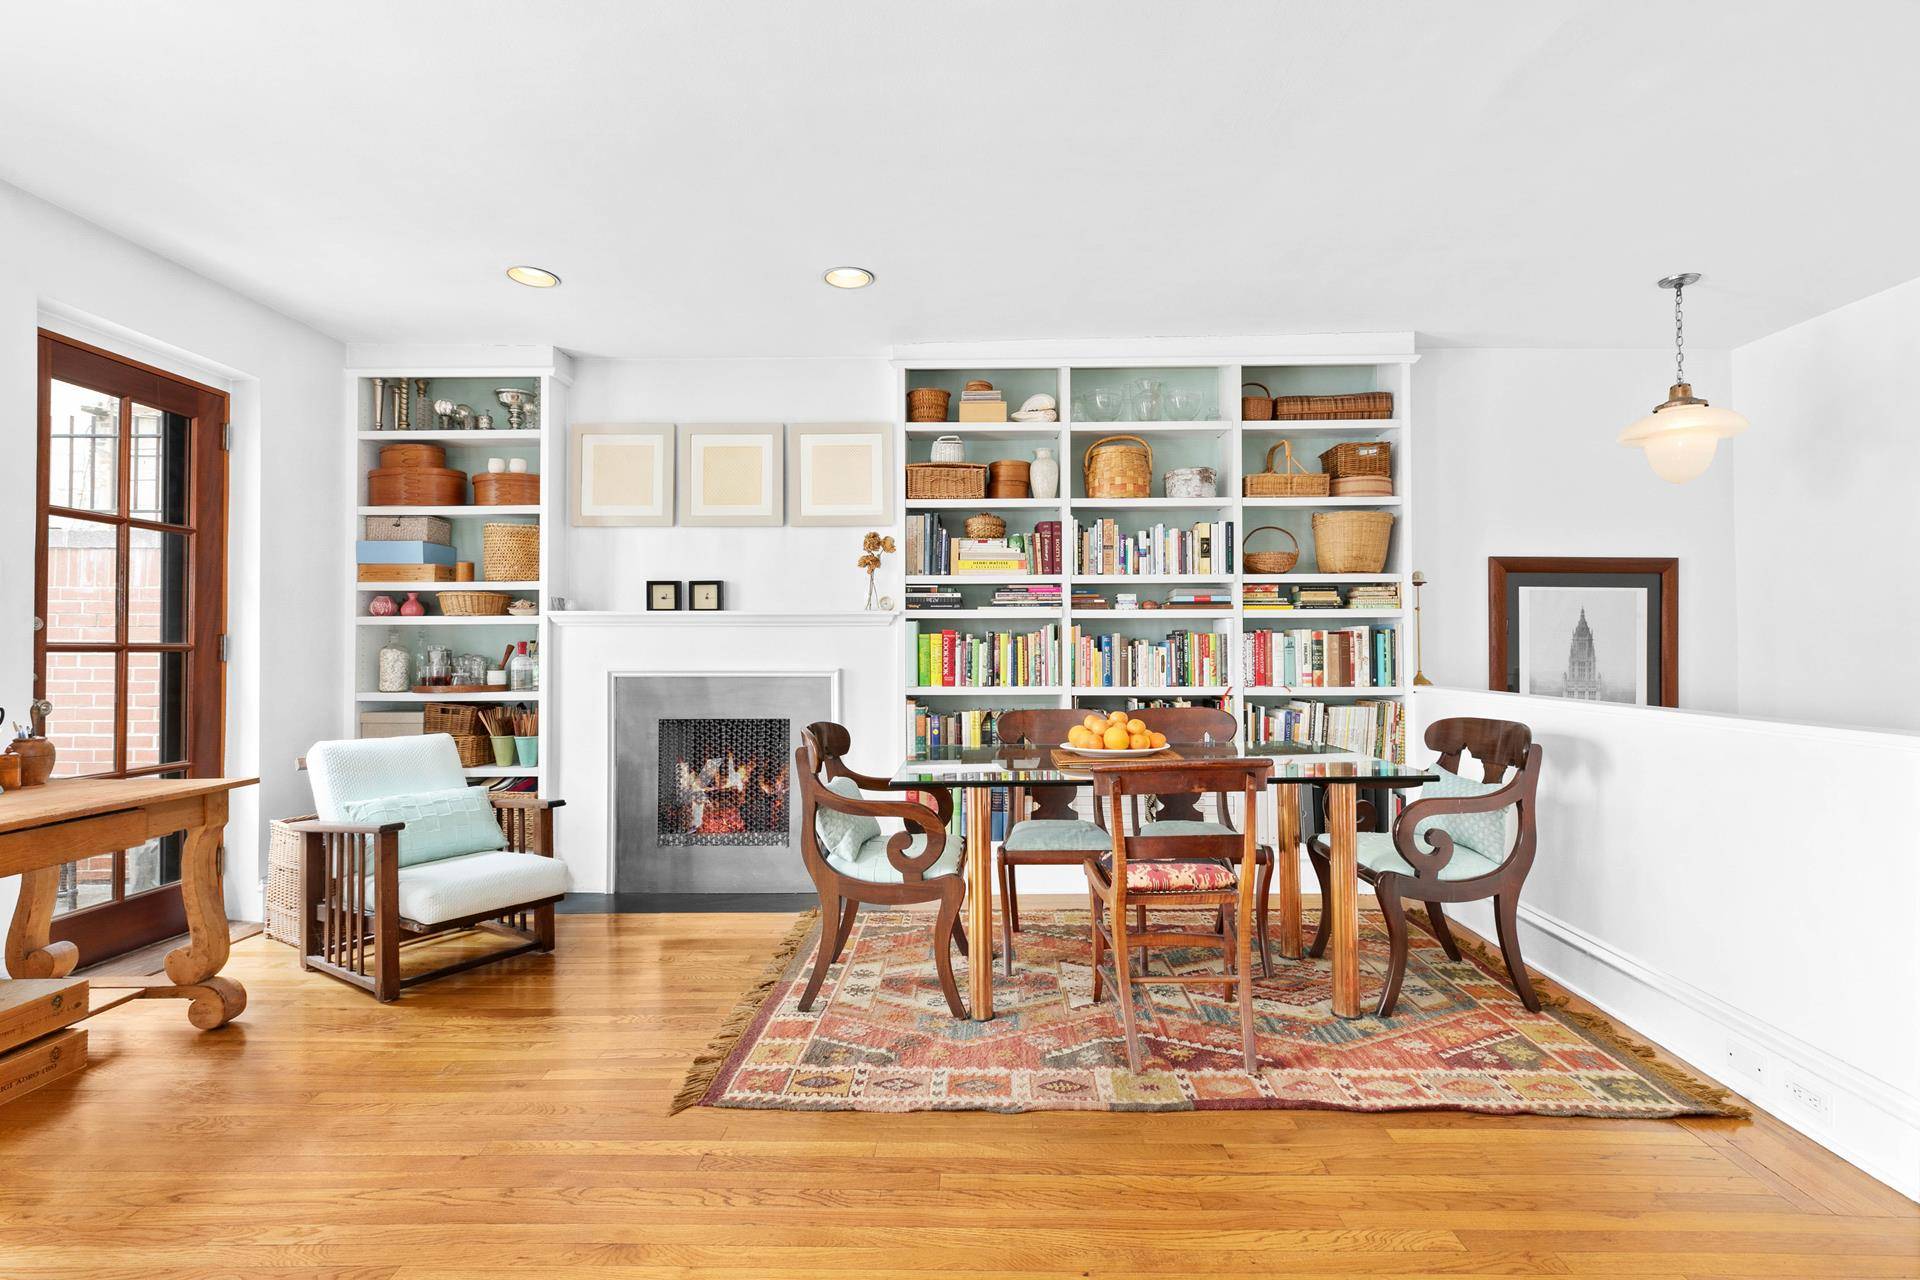 Duplex apartment with large, beautiful, private backyard on a historic North Chelsea block.